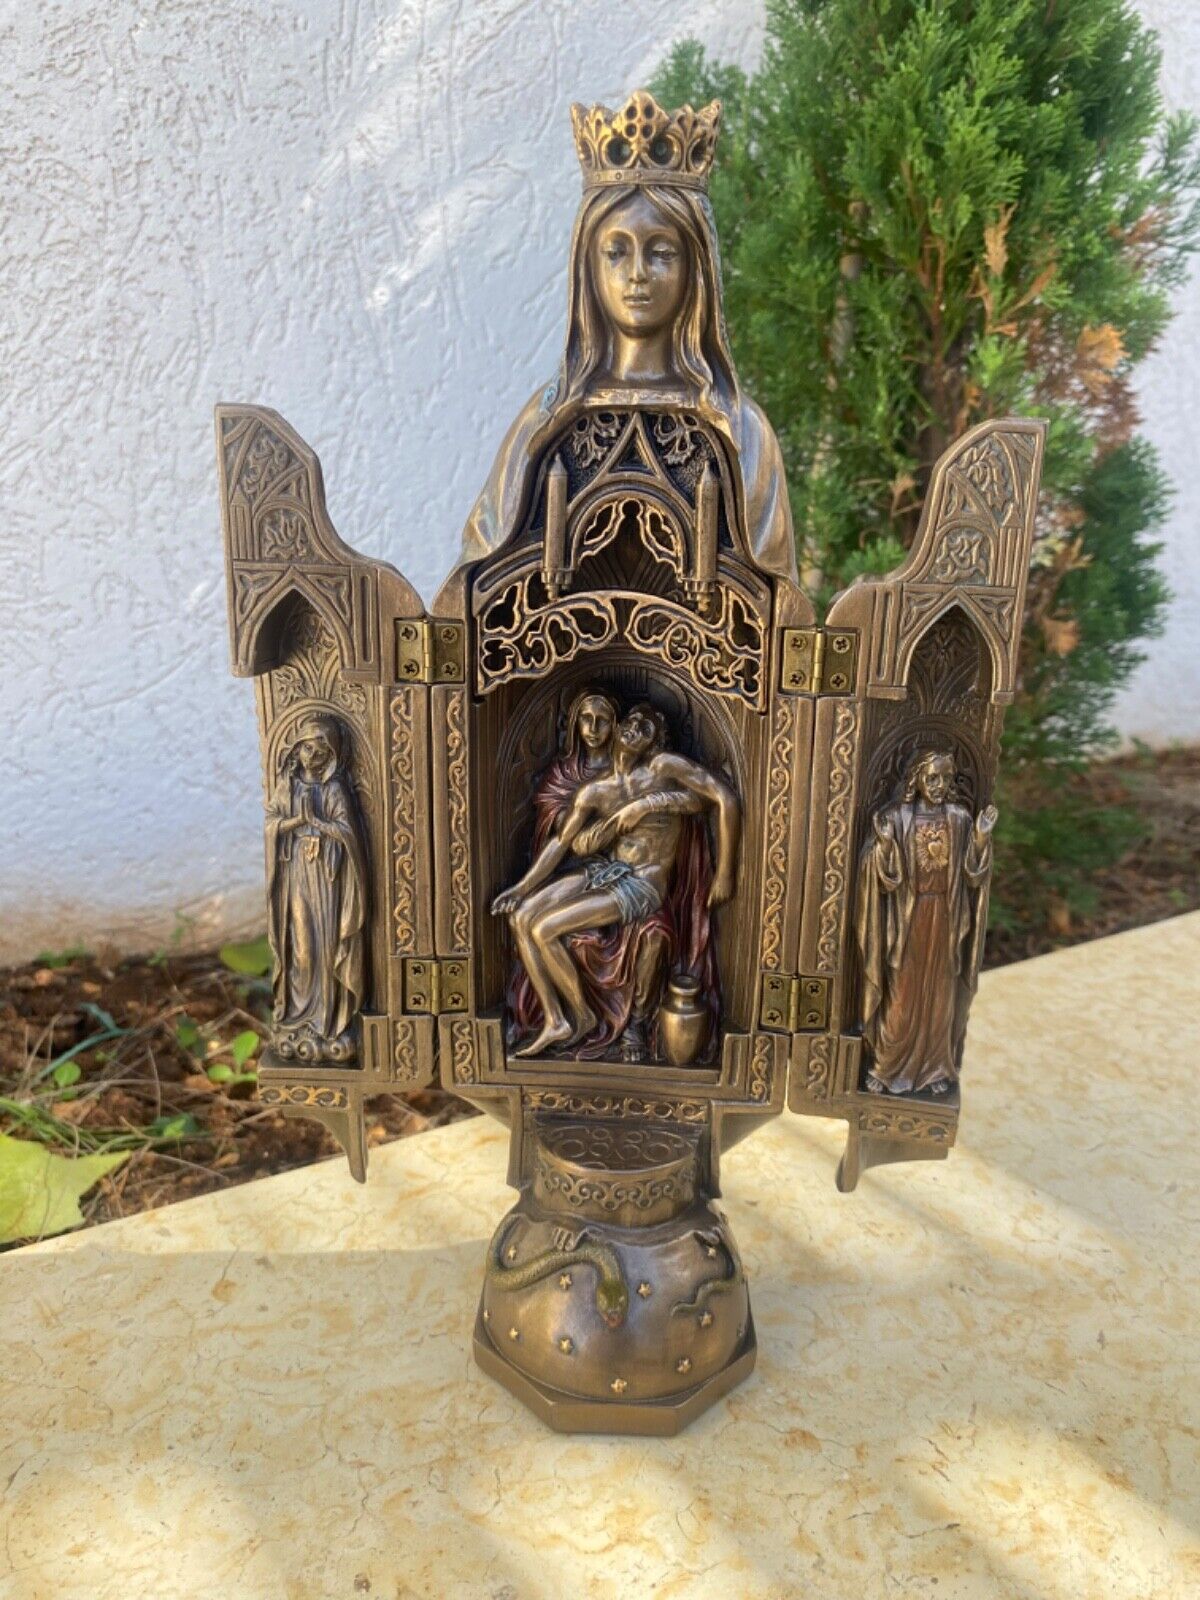 20 cm 7.8 inch bronze virgin mary statue,made of Cold Cast Bronze Coated Resin